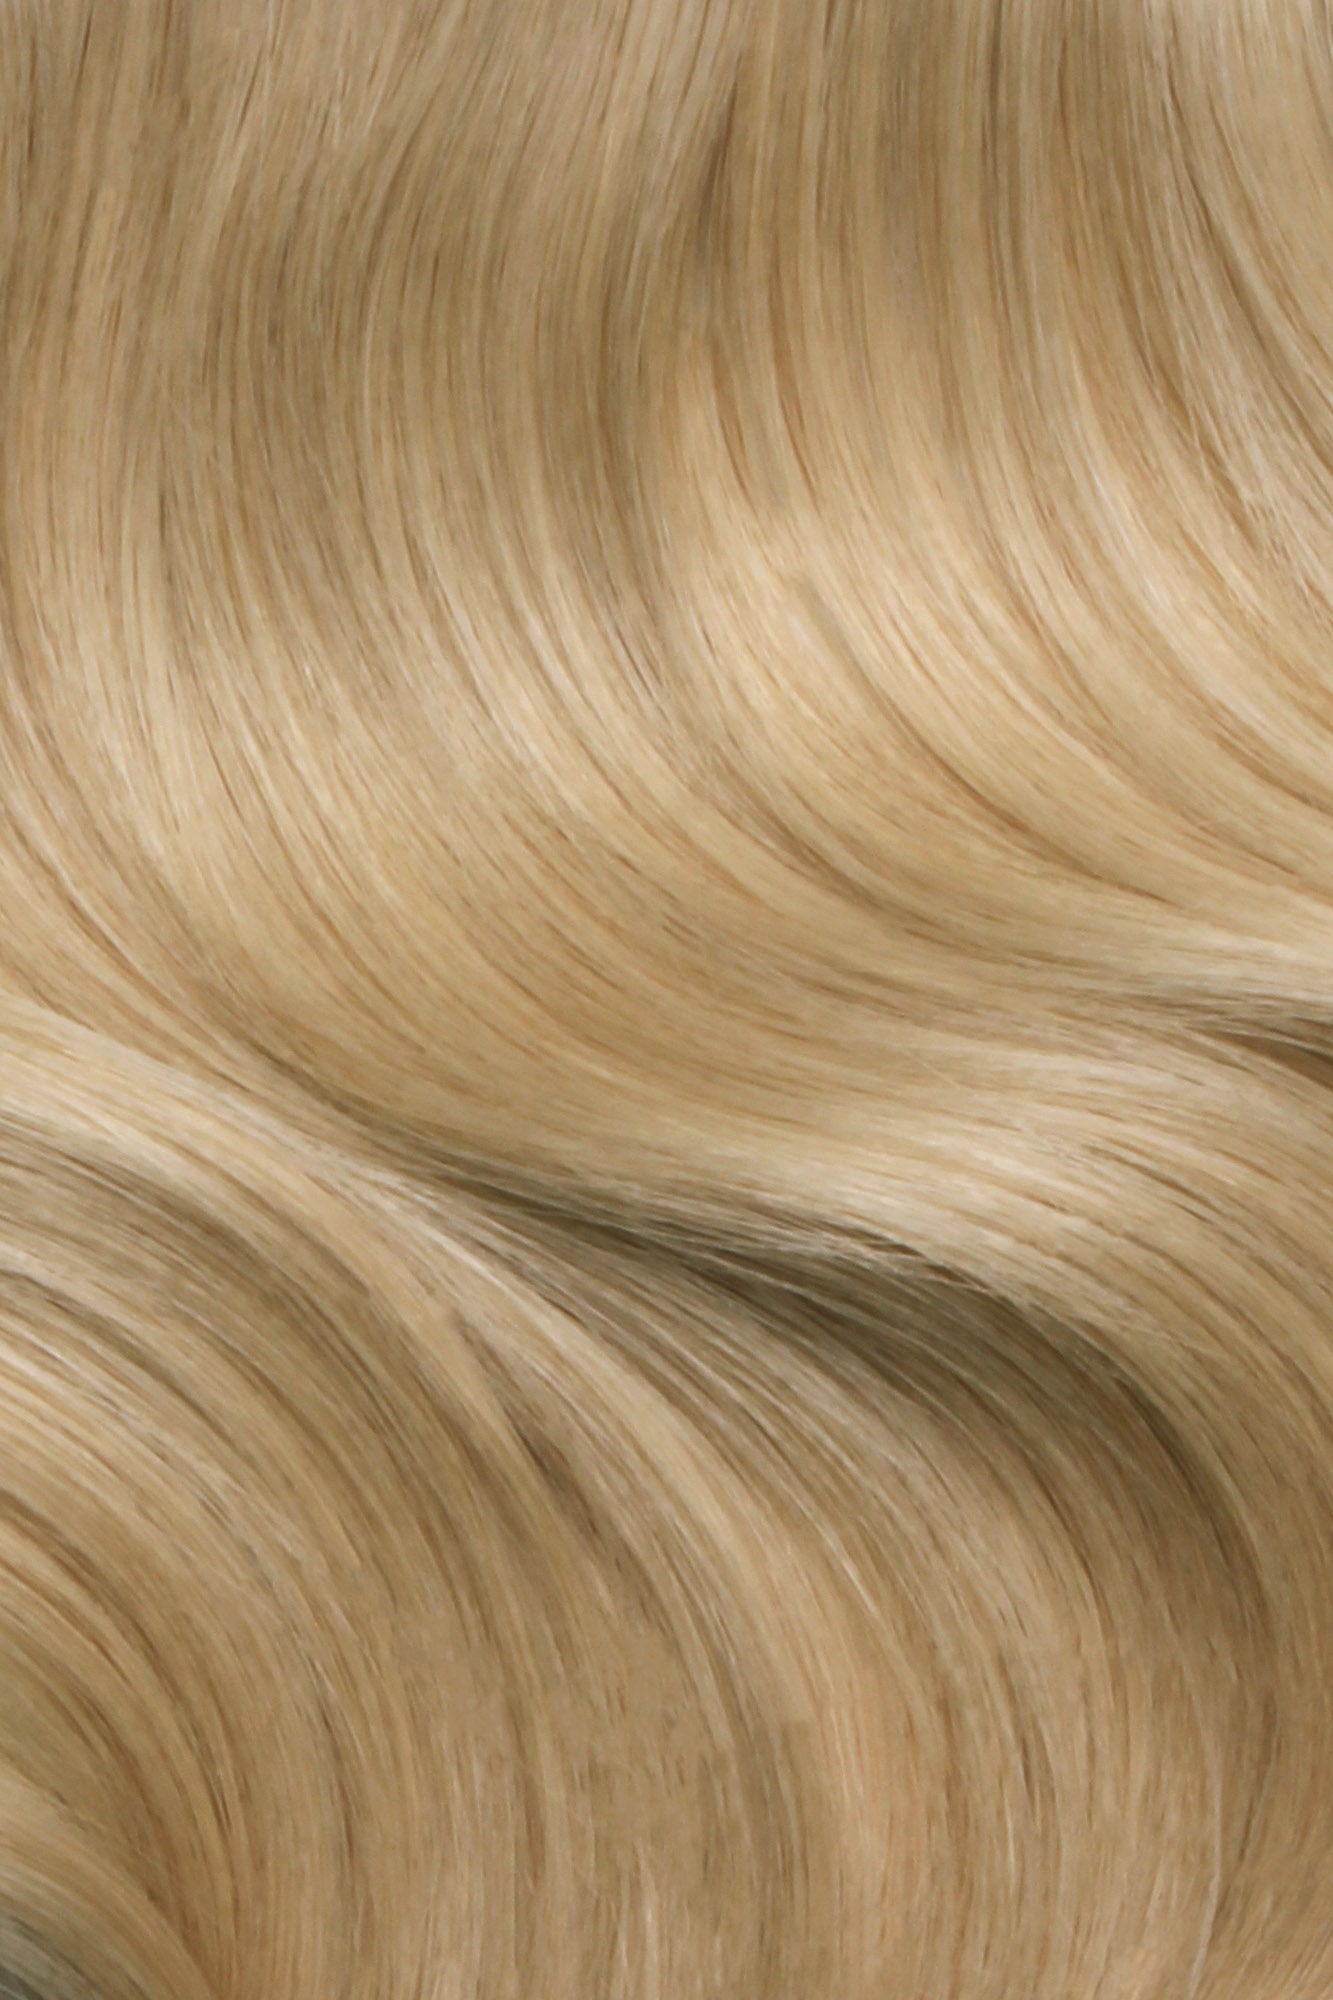 SEAMLESS® Flat Weft 20 Inches - SWAY Hair Extensions Beach-Ash-Blonde-9-613 Natural SEAMLESS® Flat Weft 20 Inches extensions. Thin, flexible, and discreet. 100% Double Drawn Remy Human Hair. Versatile and reusable